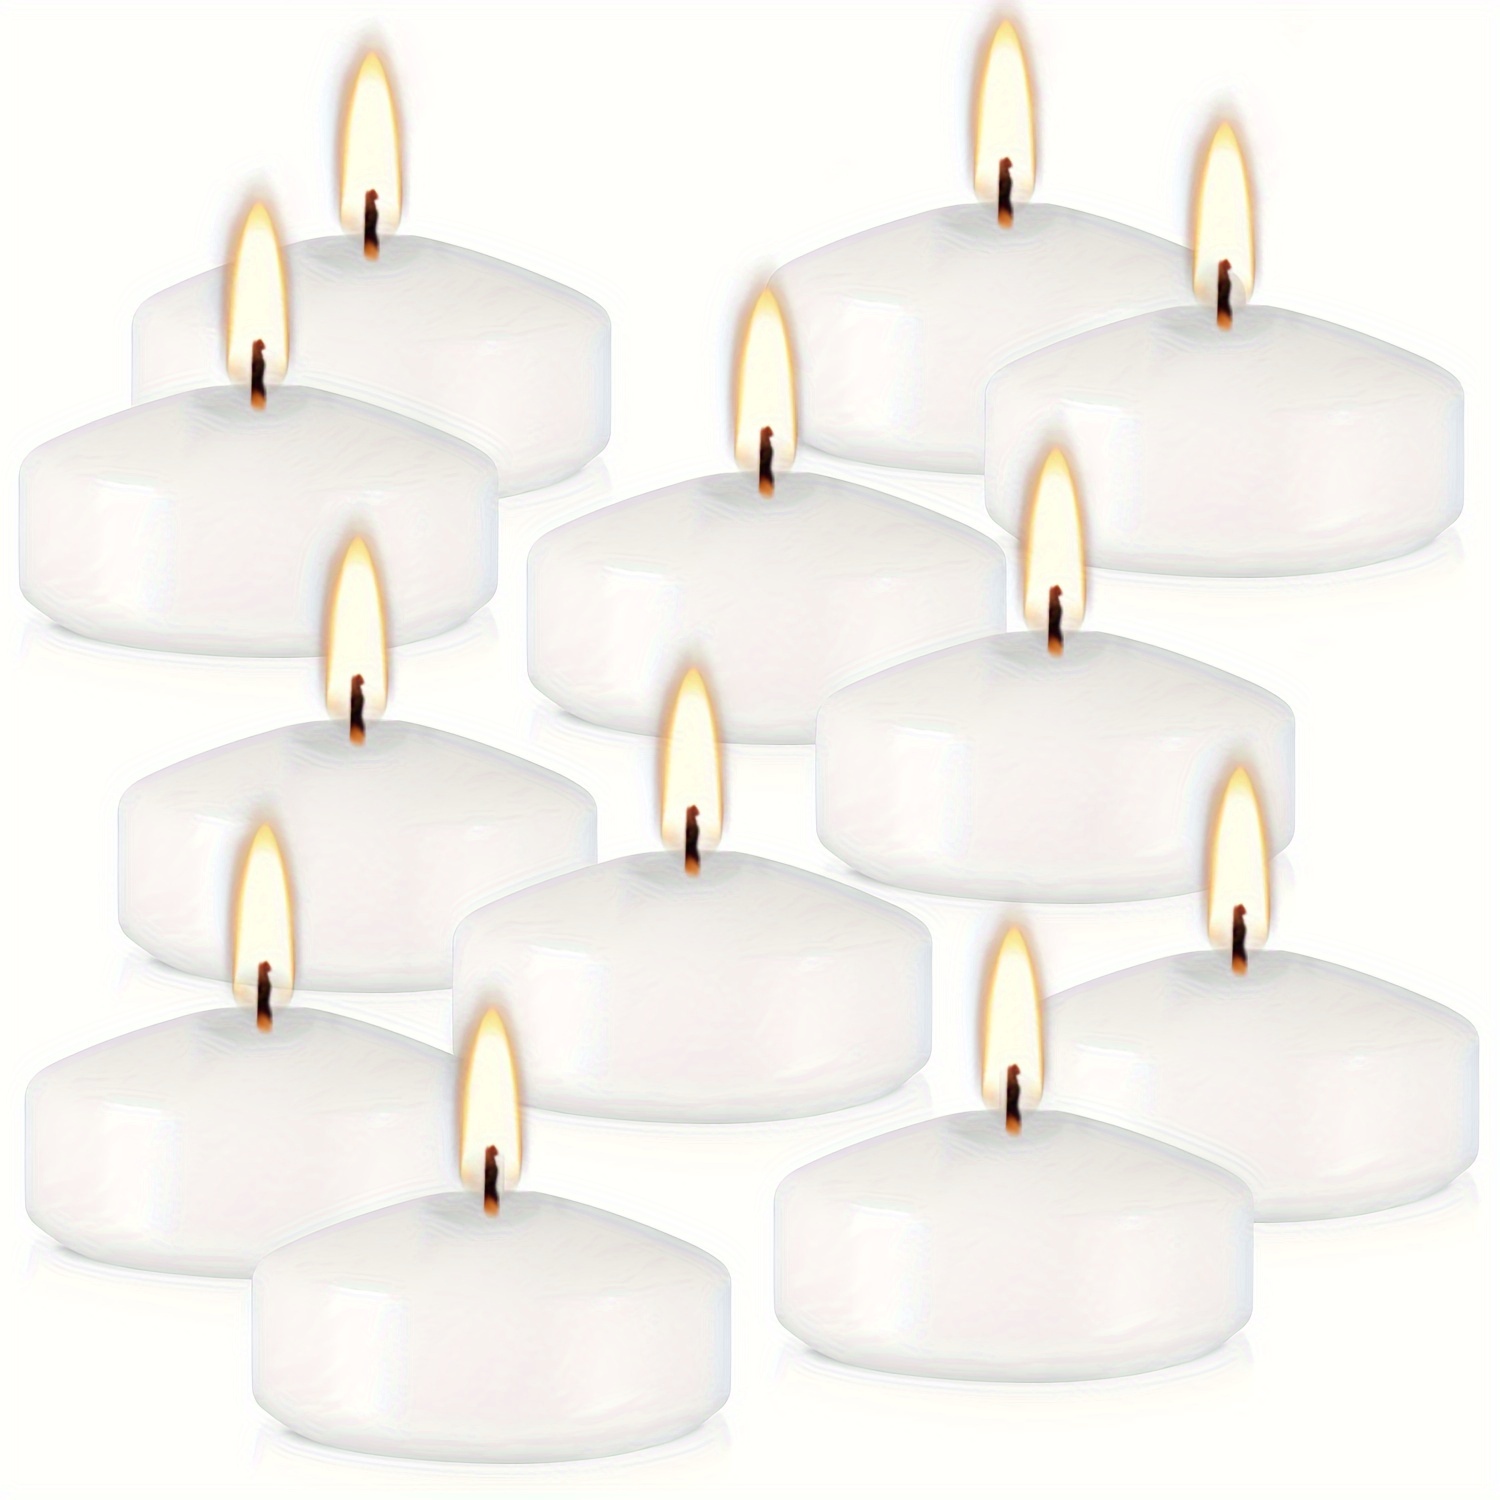 

24 Pieces Of 2-inch Waterproof Floating Candles For Water Decoration, Candle Holder Filler, Home Room Bathtub Floating Decoration